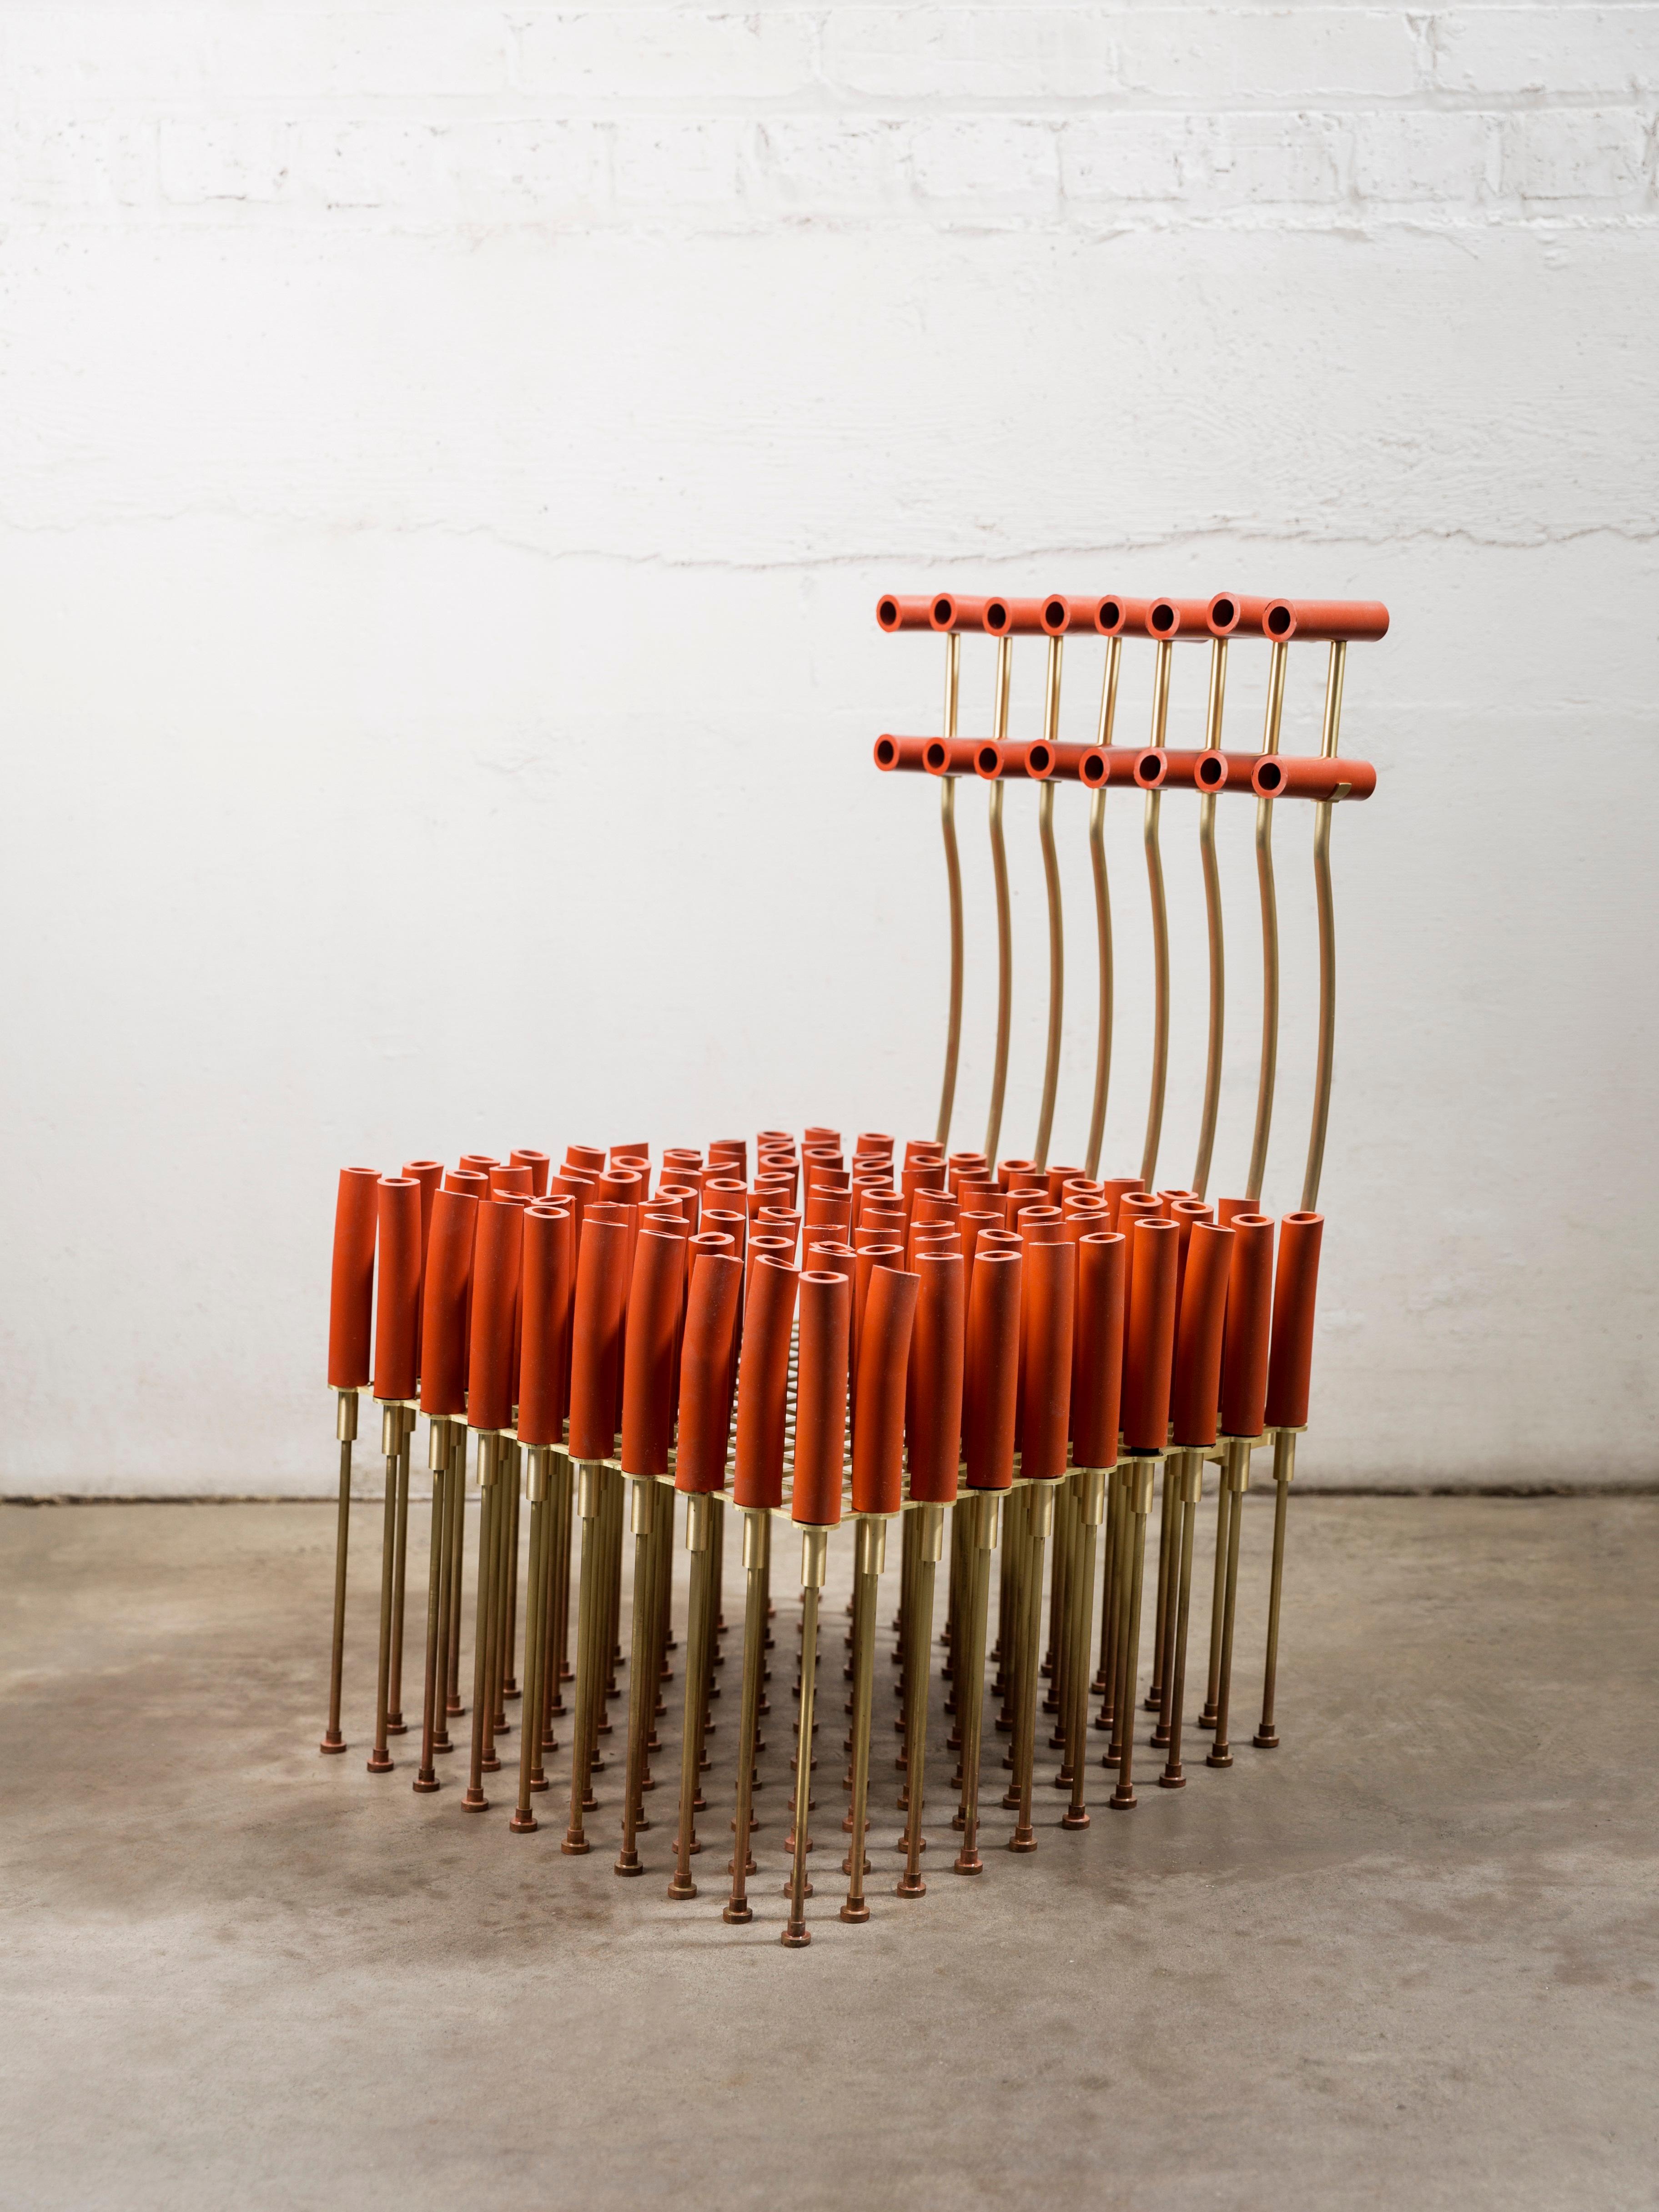 Chair with tubes and brass by Gentner Design
Dimensions: D 42.5 x W 50 x H 63.5 cm.
Materials: brass, silicone tubes

A chair? made of brass and silicone tubes.

Gentner Design
Rooted in a language of sculpture, character defining details,